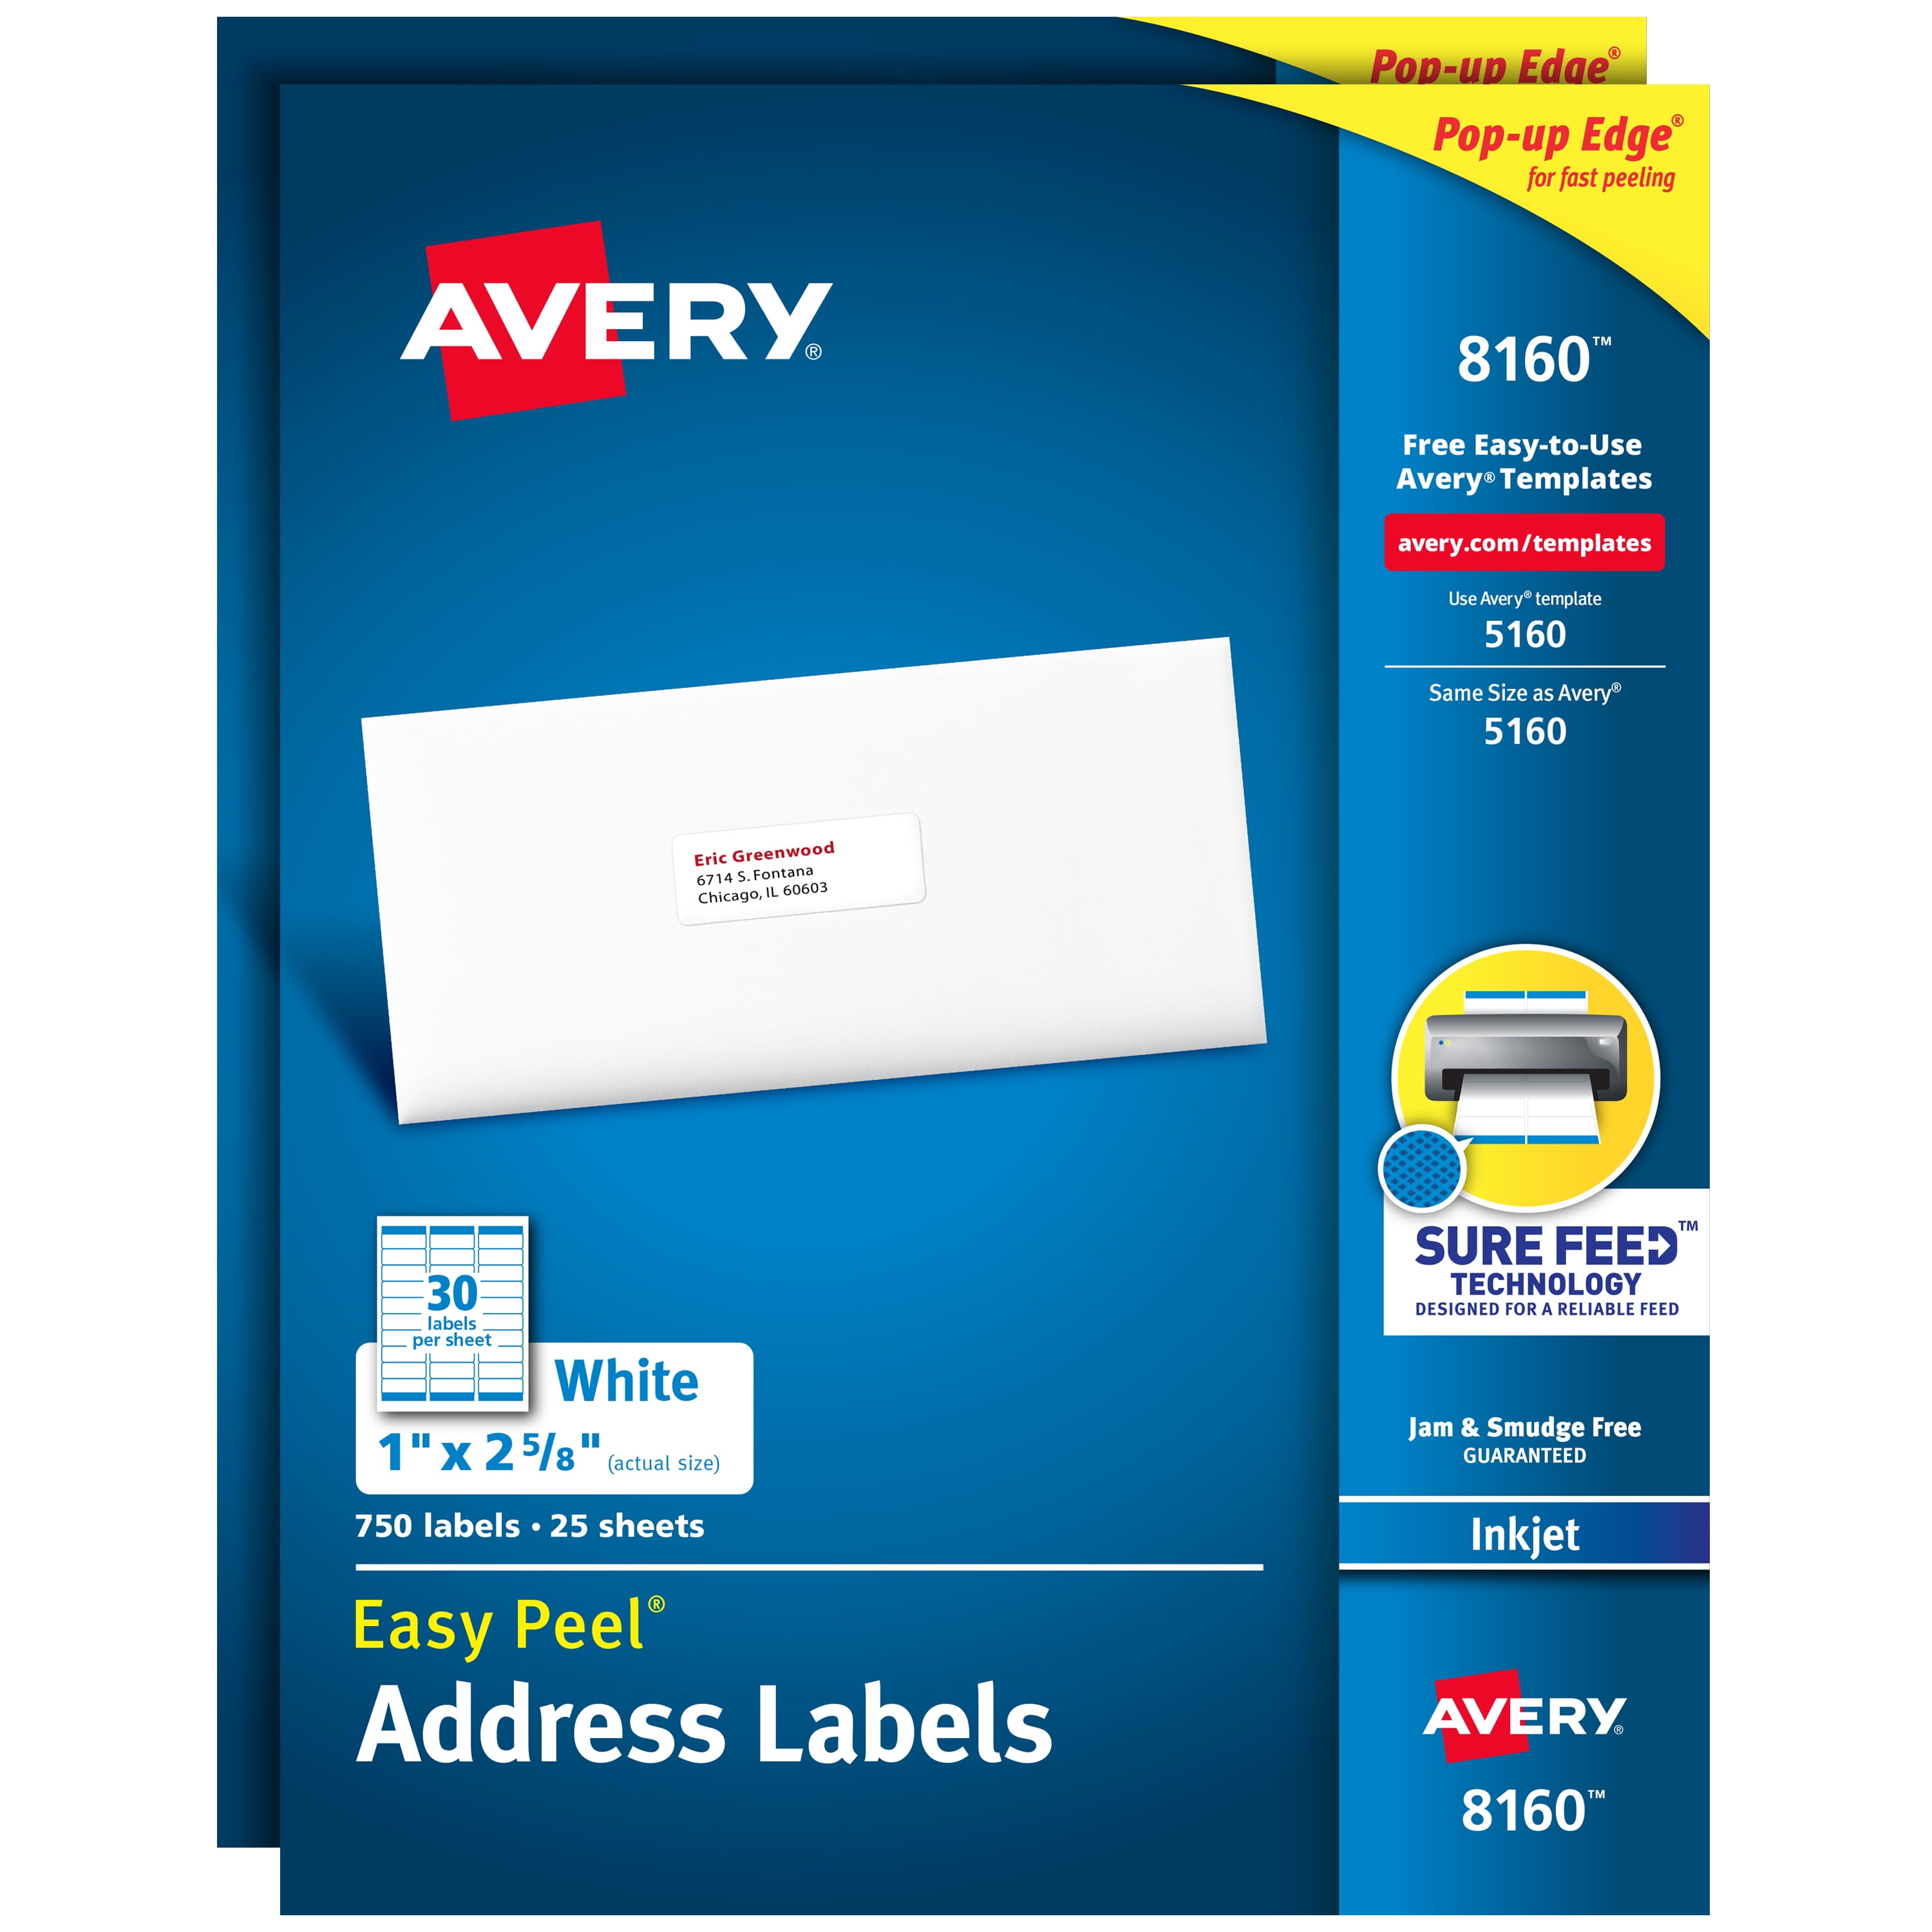 Avery Mailing Address Labels, Inkjet Printers, 2333,2333 Labels, 2333 x 233-233/233,  Permanent Adhesive (233 packs 233233360) In Office Depot Label Template